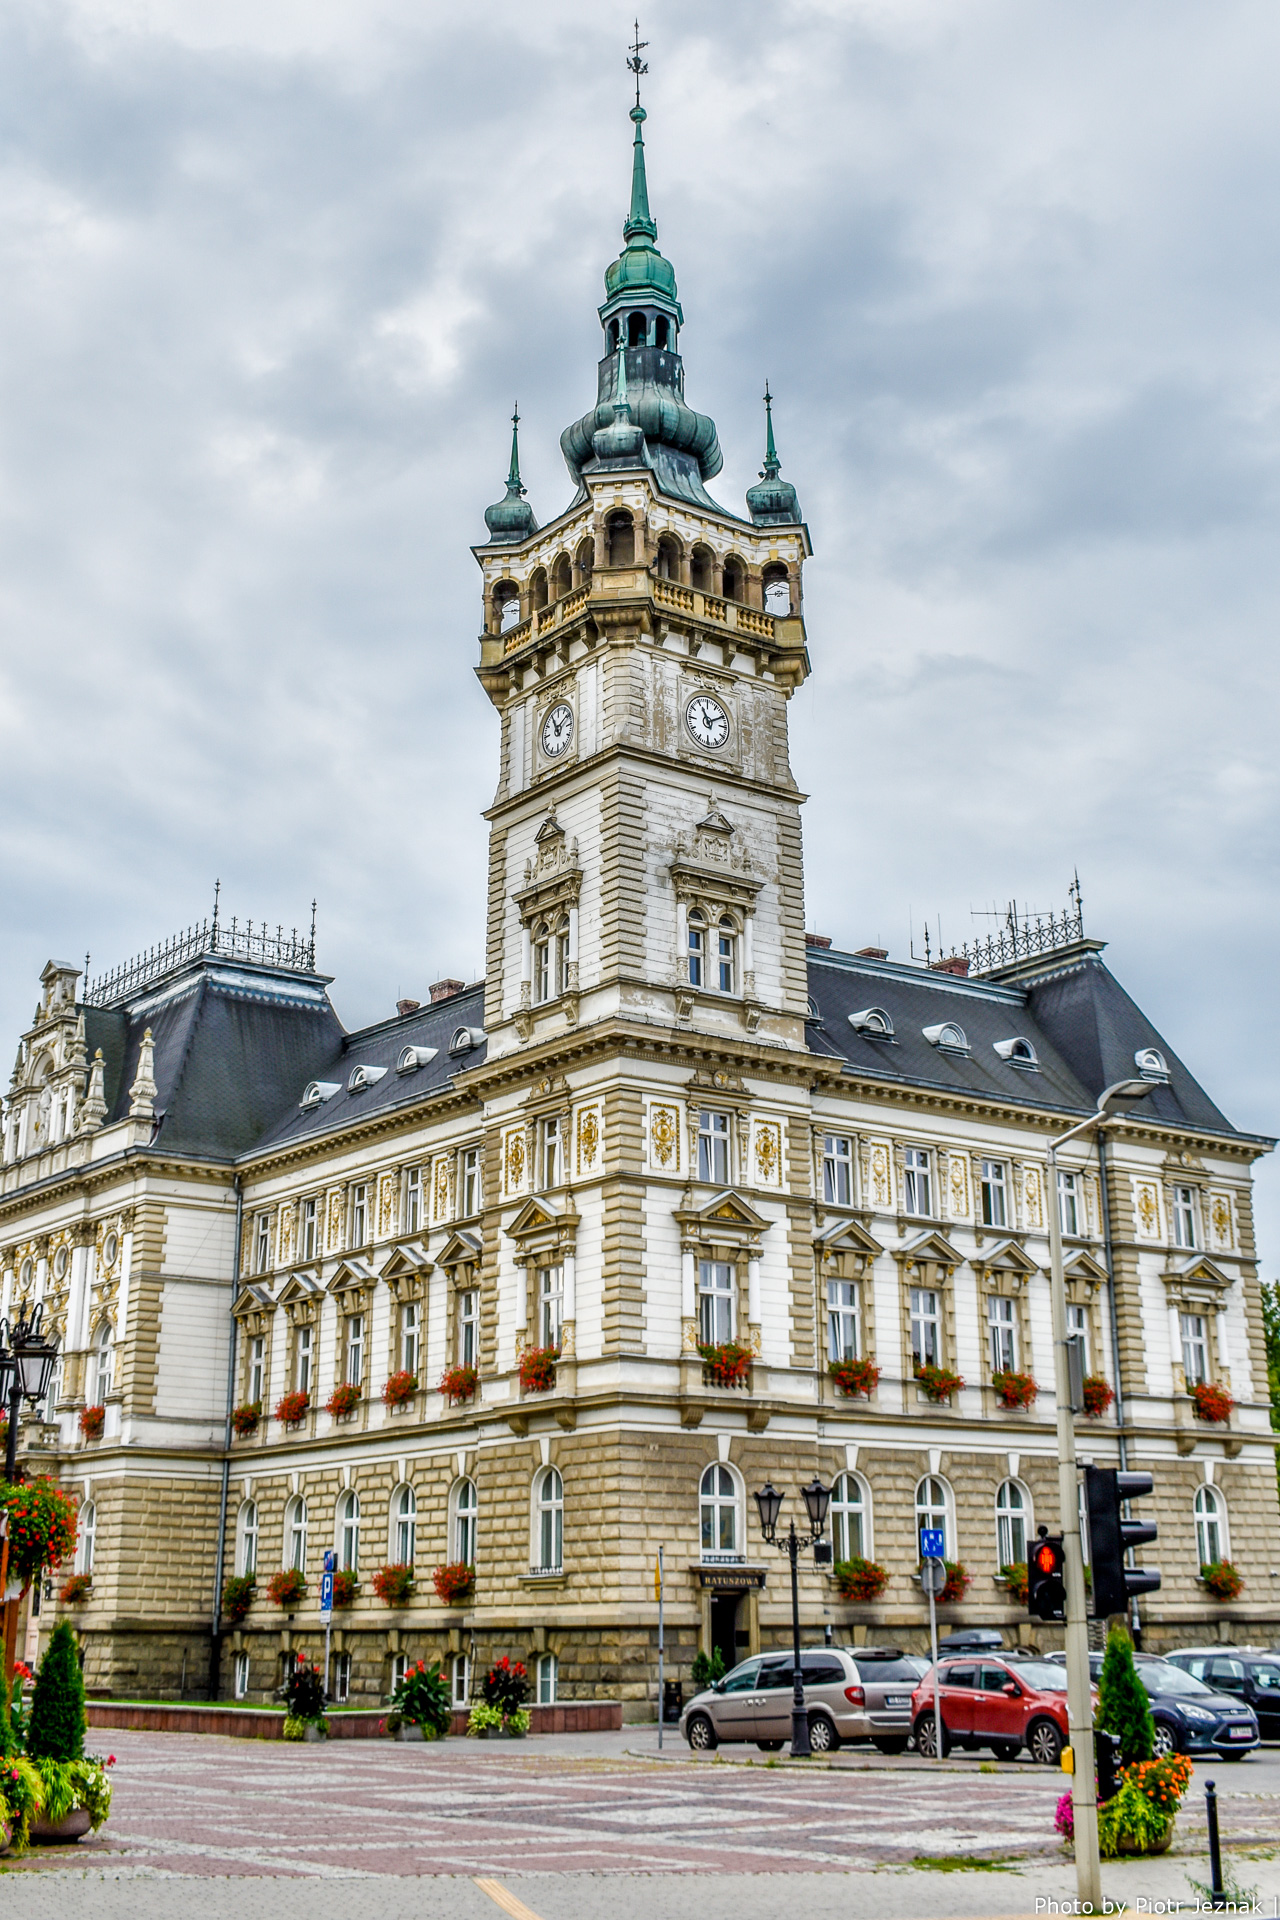 The clock tower of the town hall in Bielsko-Biala